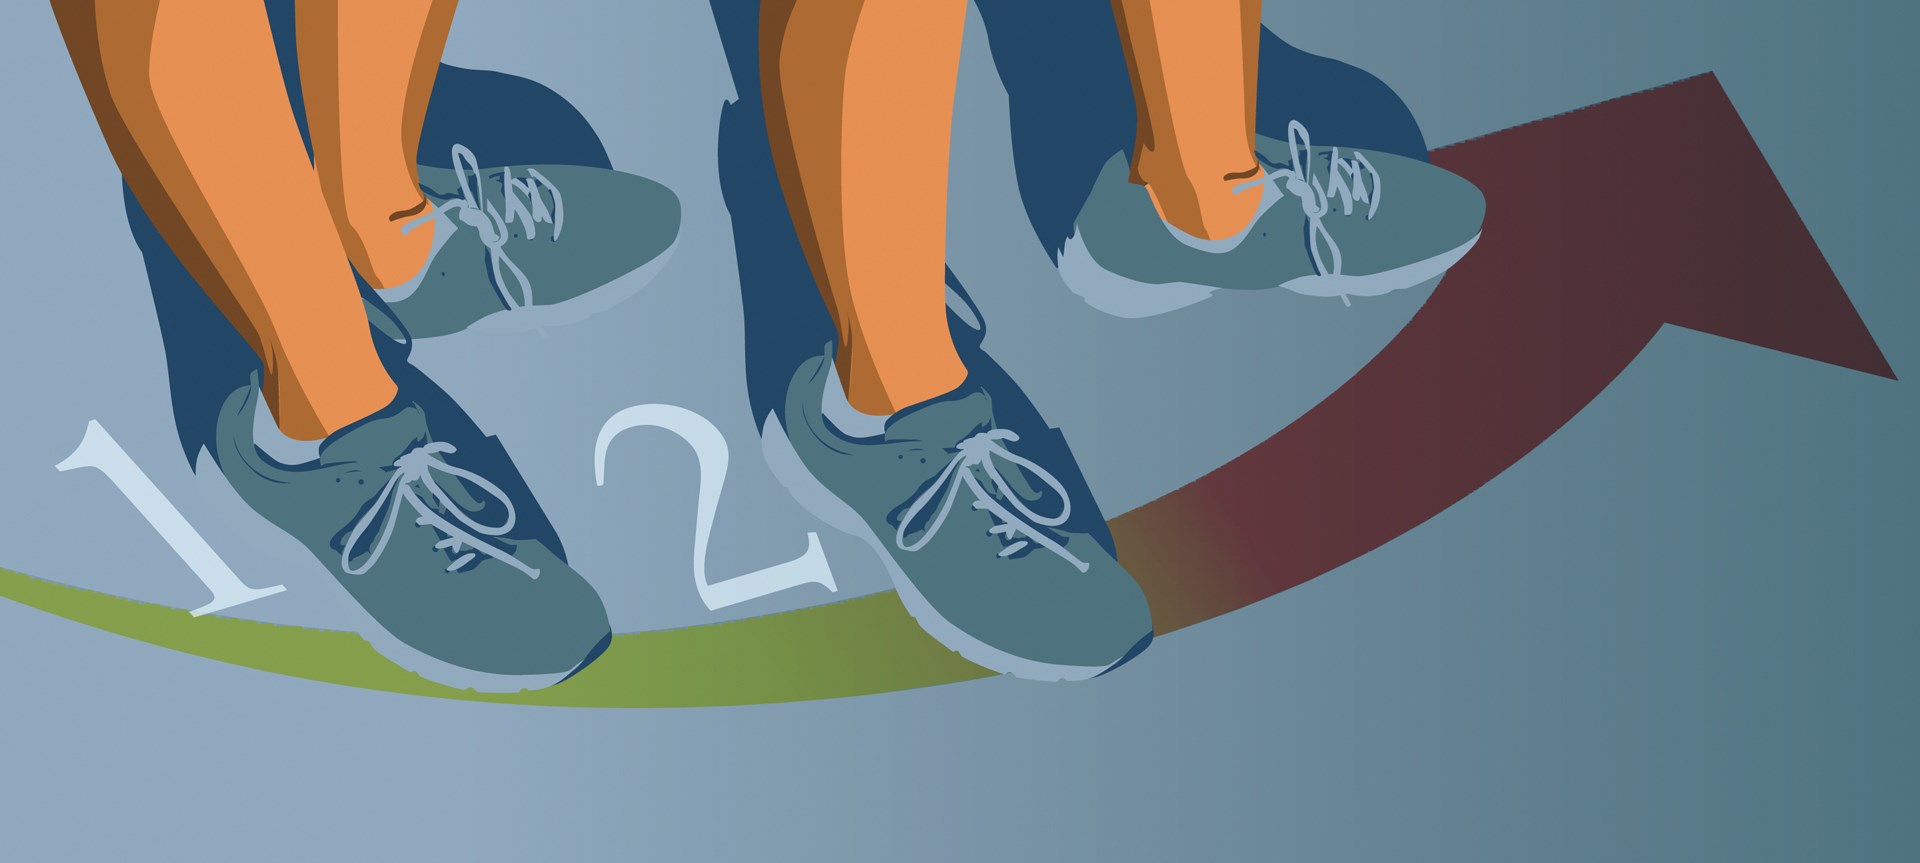 cartoonized feet with numbers indicating steps for moving